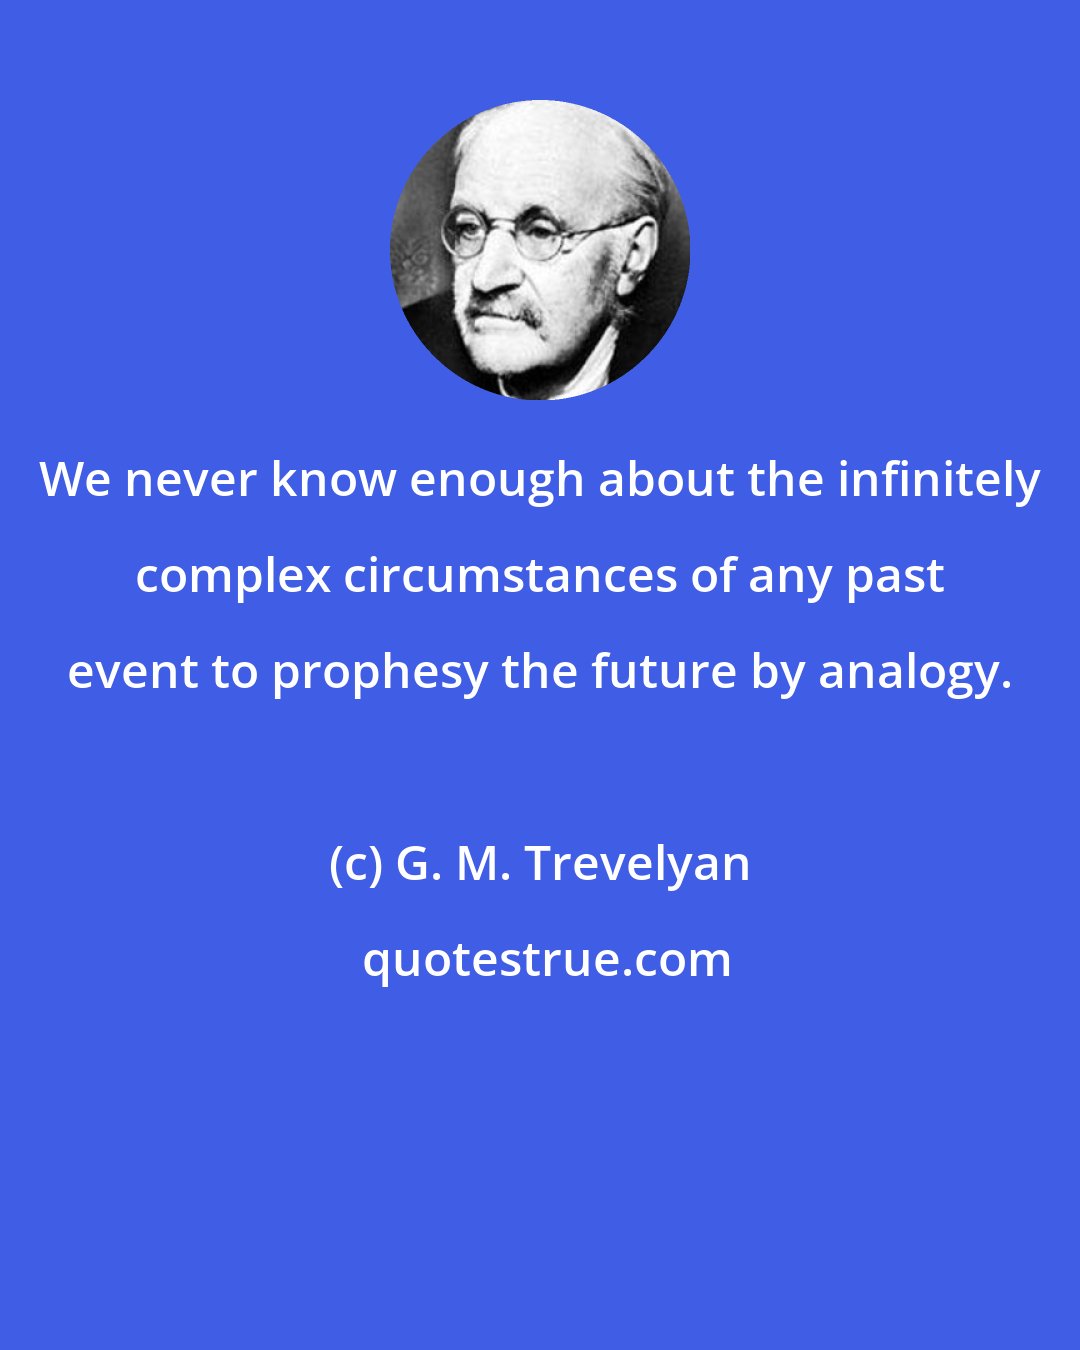 G. M. Trevelyan: We never know enough about the infinitely complex circumstances of any past event to prophesy the future by analogy.